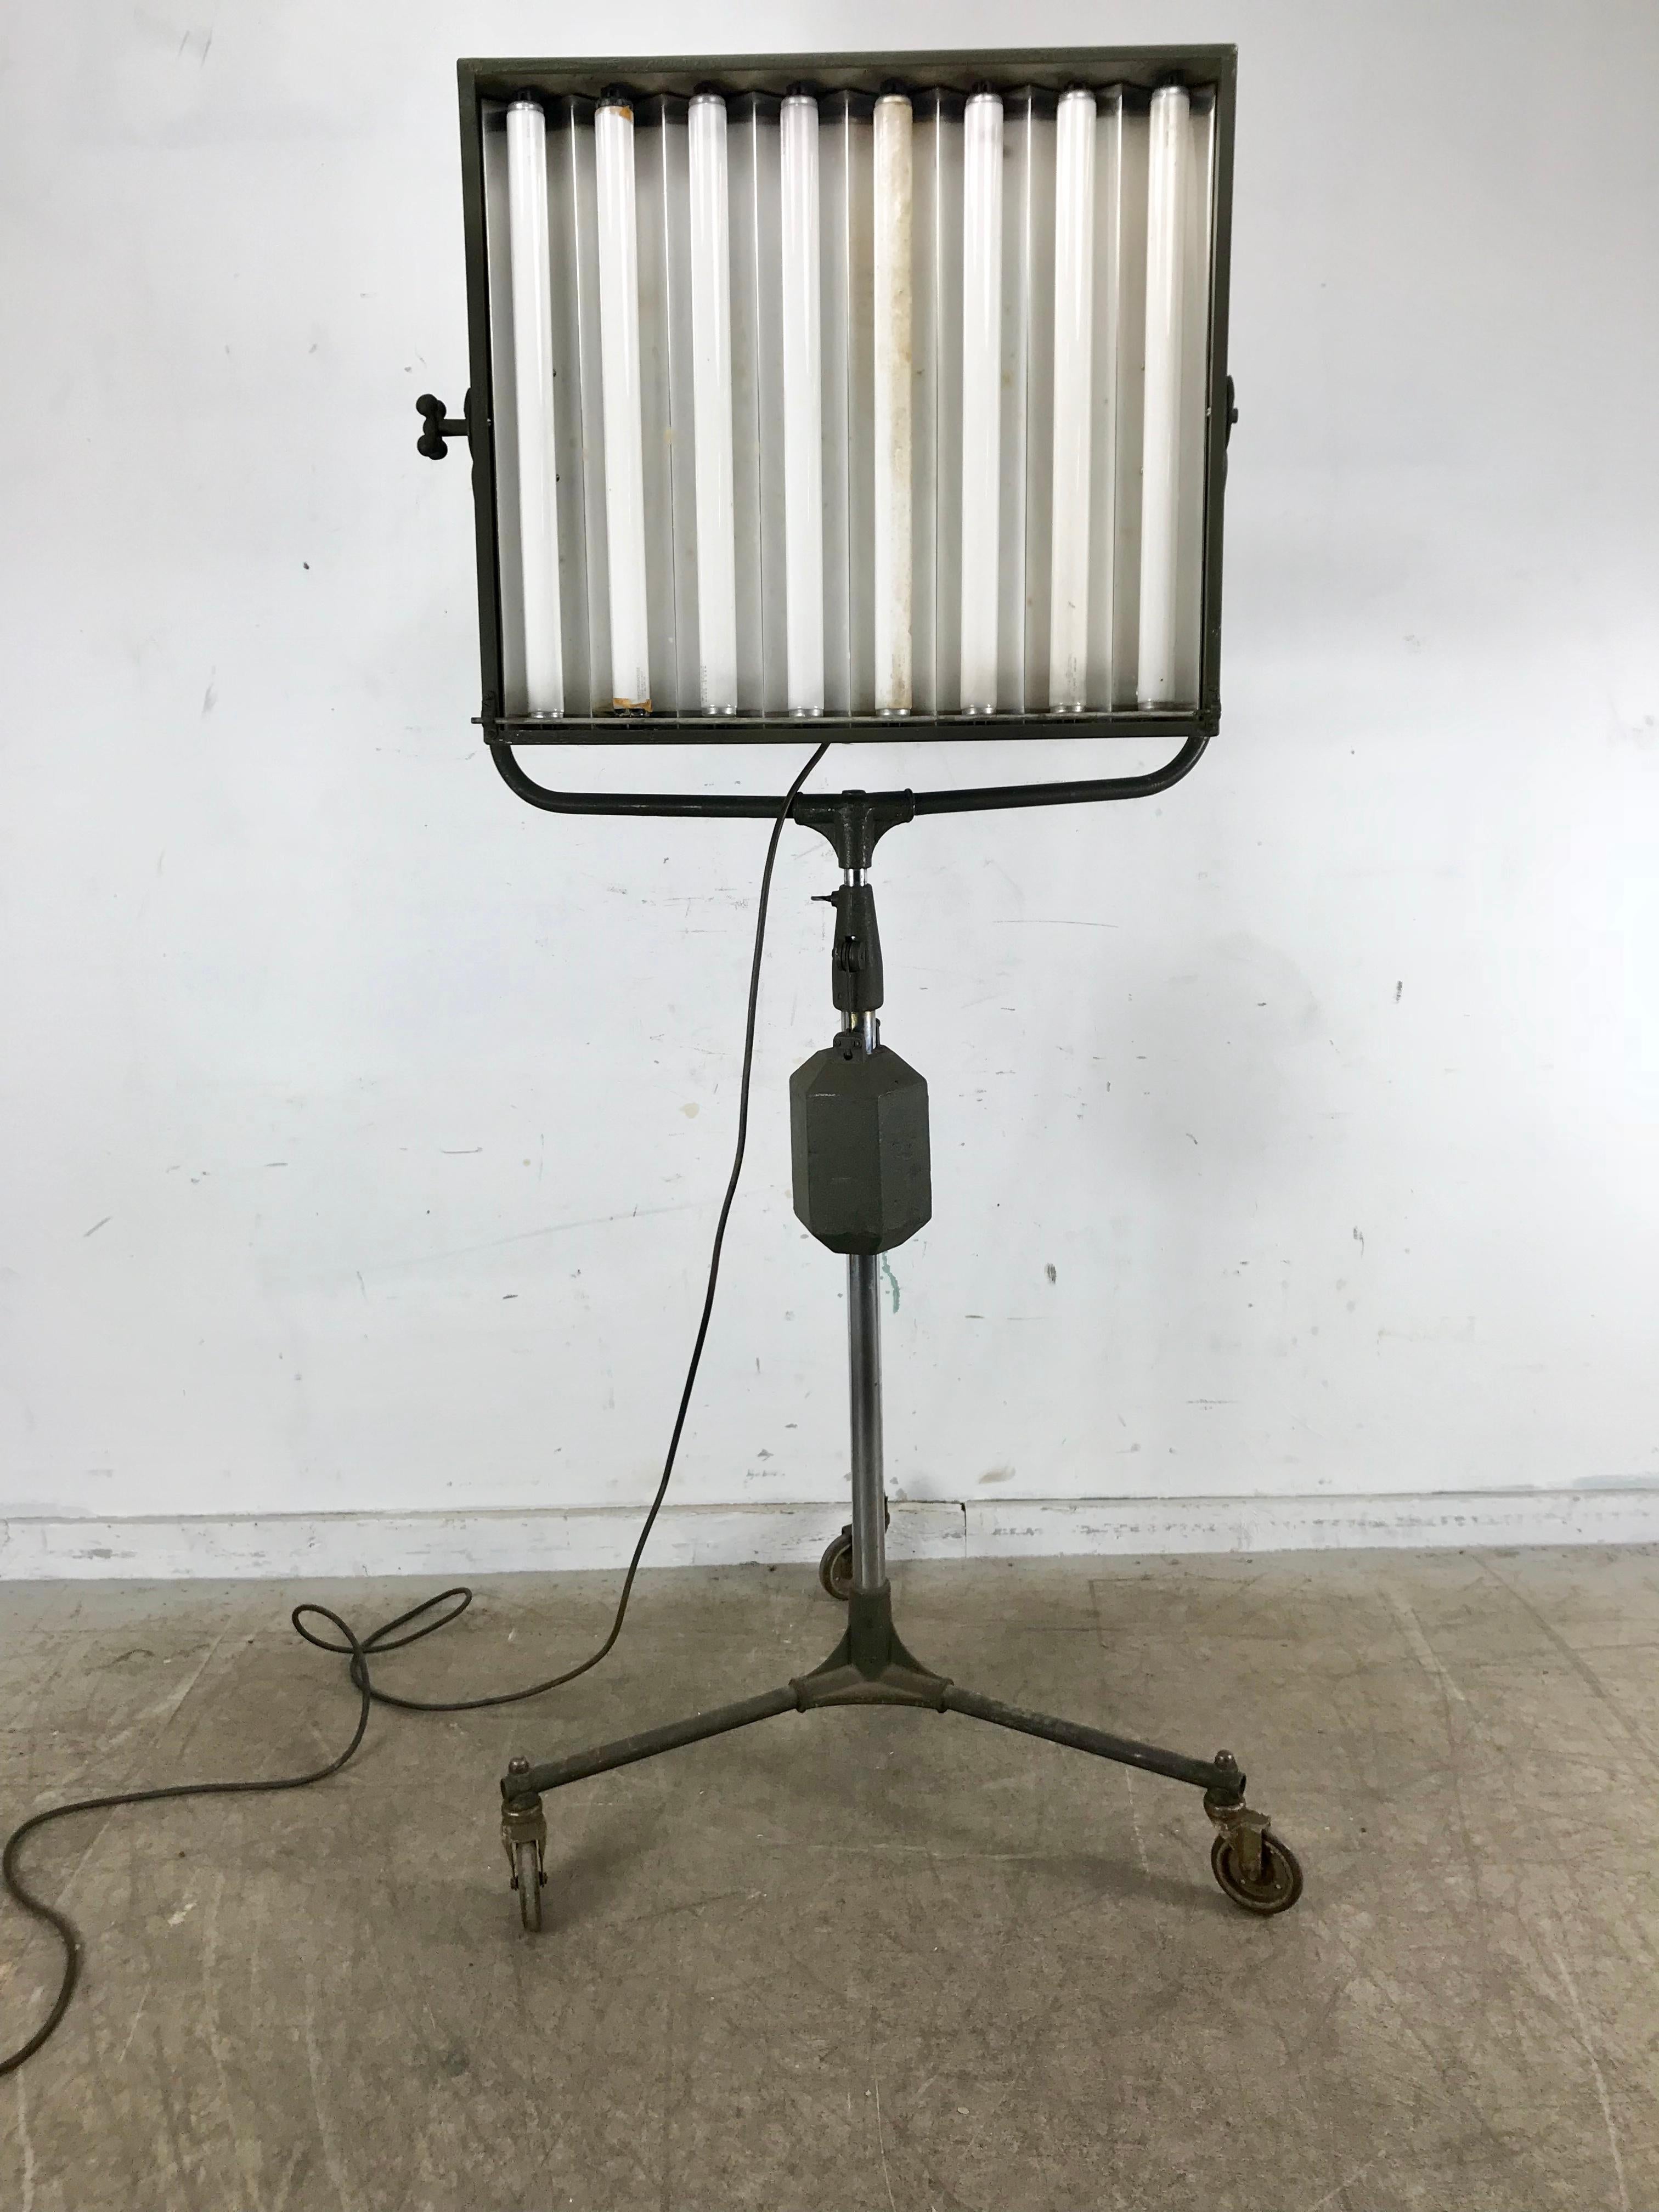 Industrial photo adjustable floor lamp made by Beattie's Hollywood Hi-Light Company, unusual weighted pulley system for height adjustment, height adjustment from 73